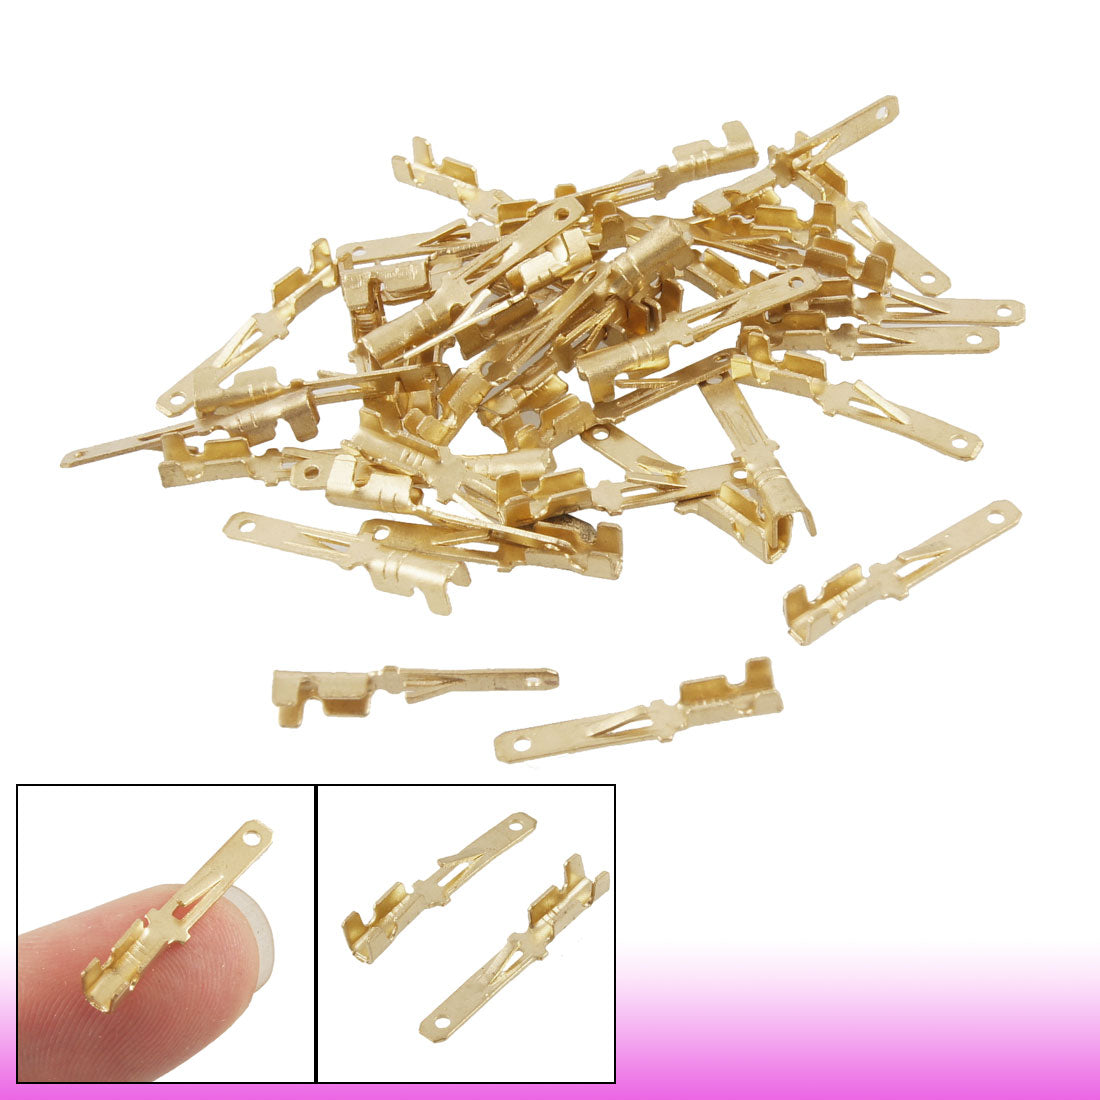 uxcell Uxcell 40 Pcs Gold Tone Male Spade Crimp Terminals 2.8mm Wiring Connectors